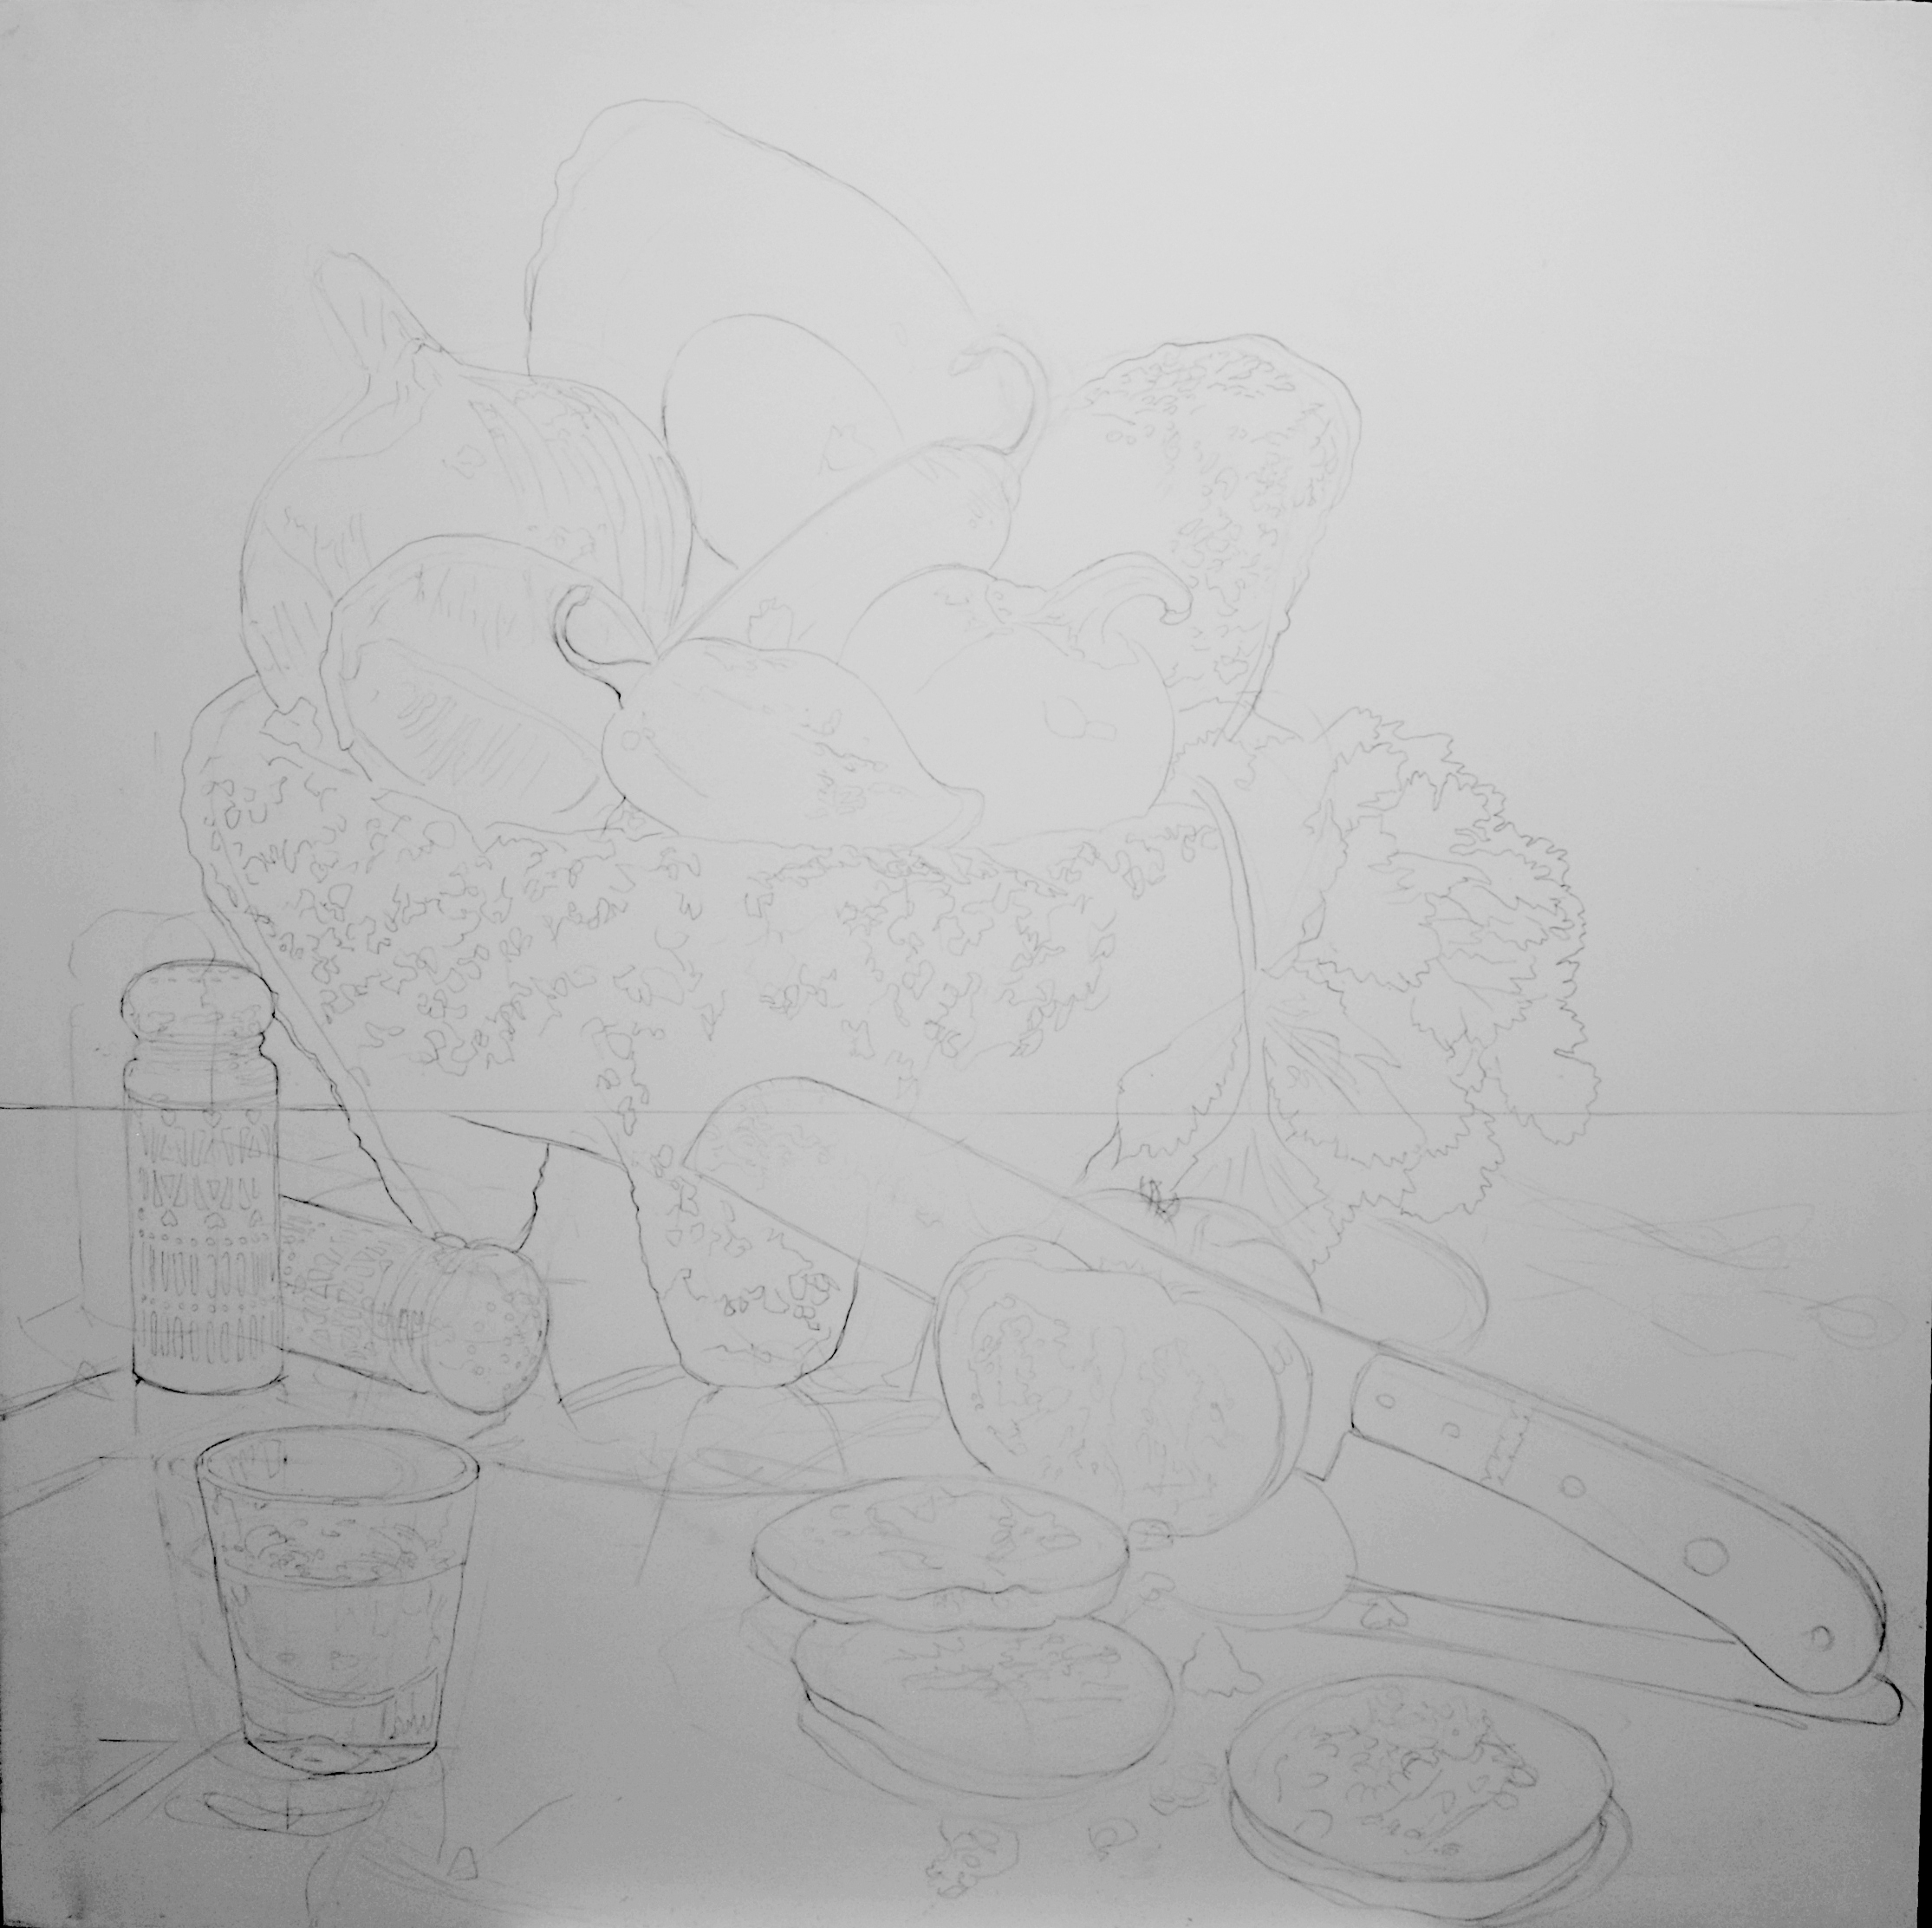 Line drawing for the still life composition